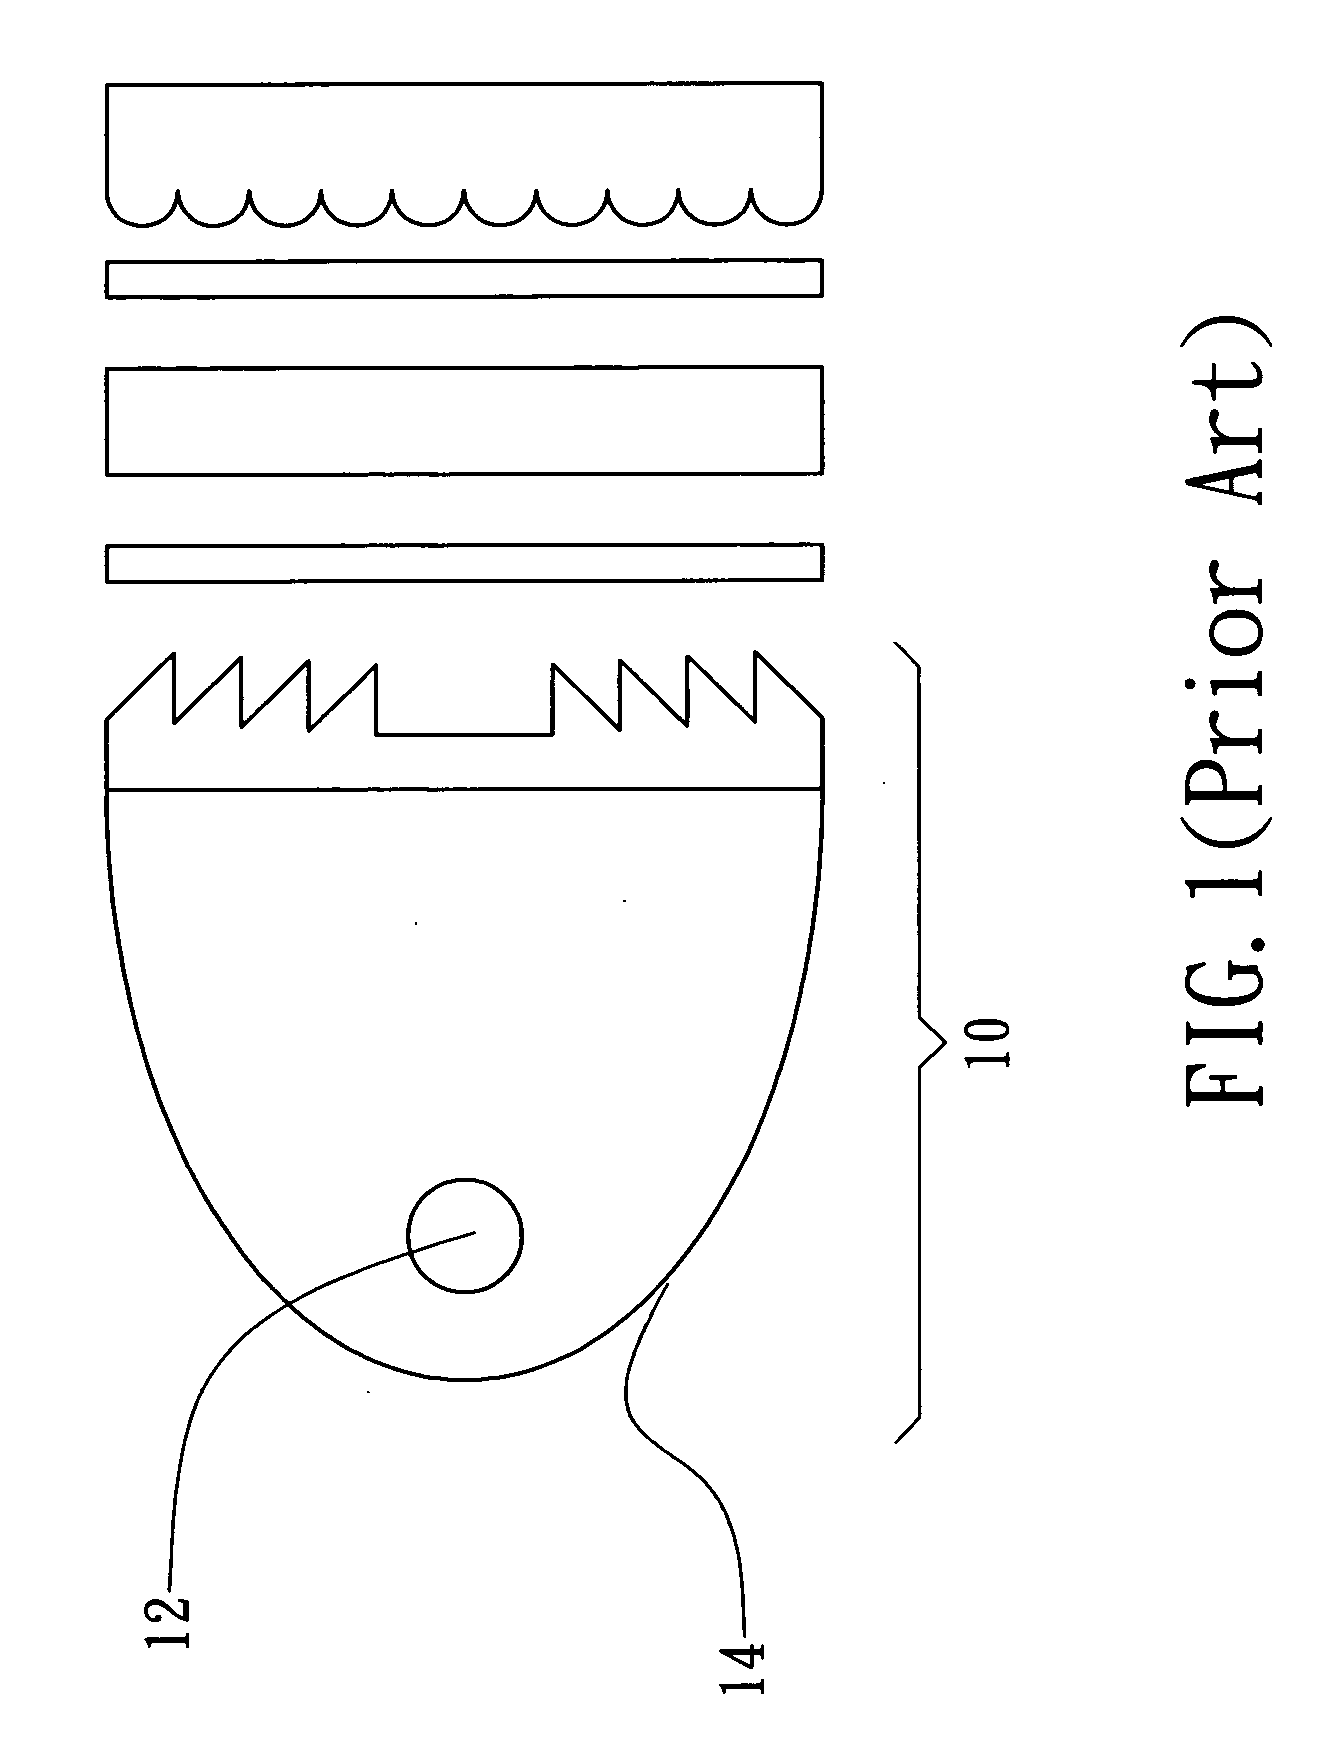 Lighting device with integration sheet